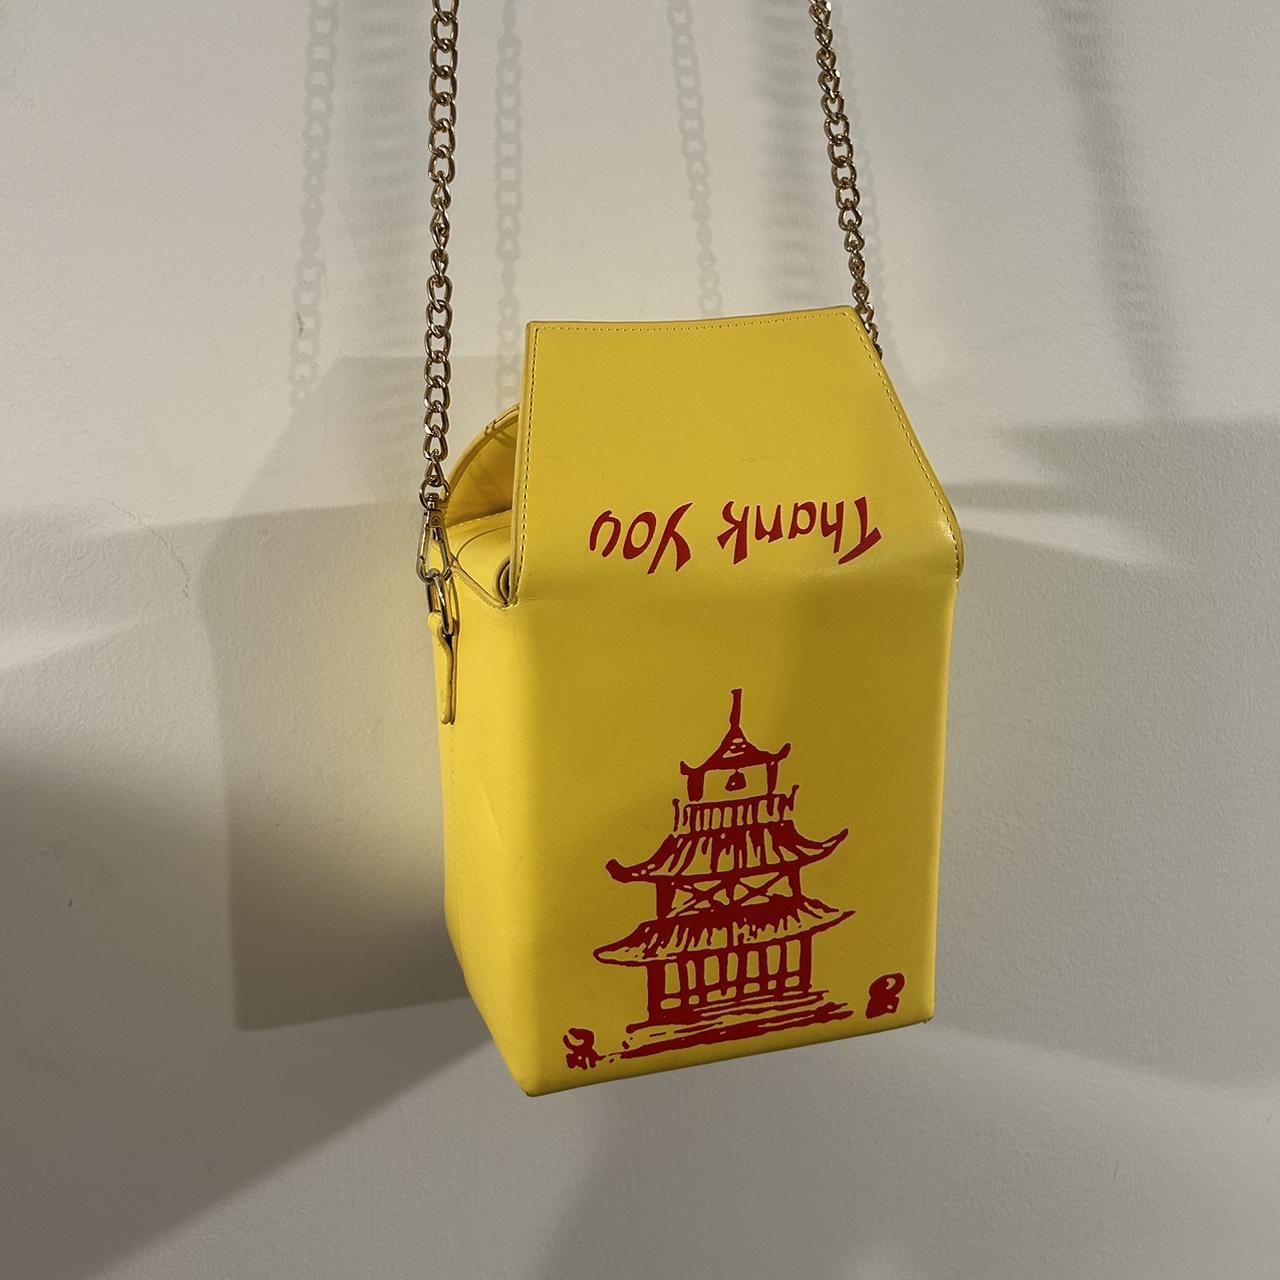 Chinese takeout box purse | Purses, Chinese takeout box, Clothes design